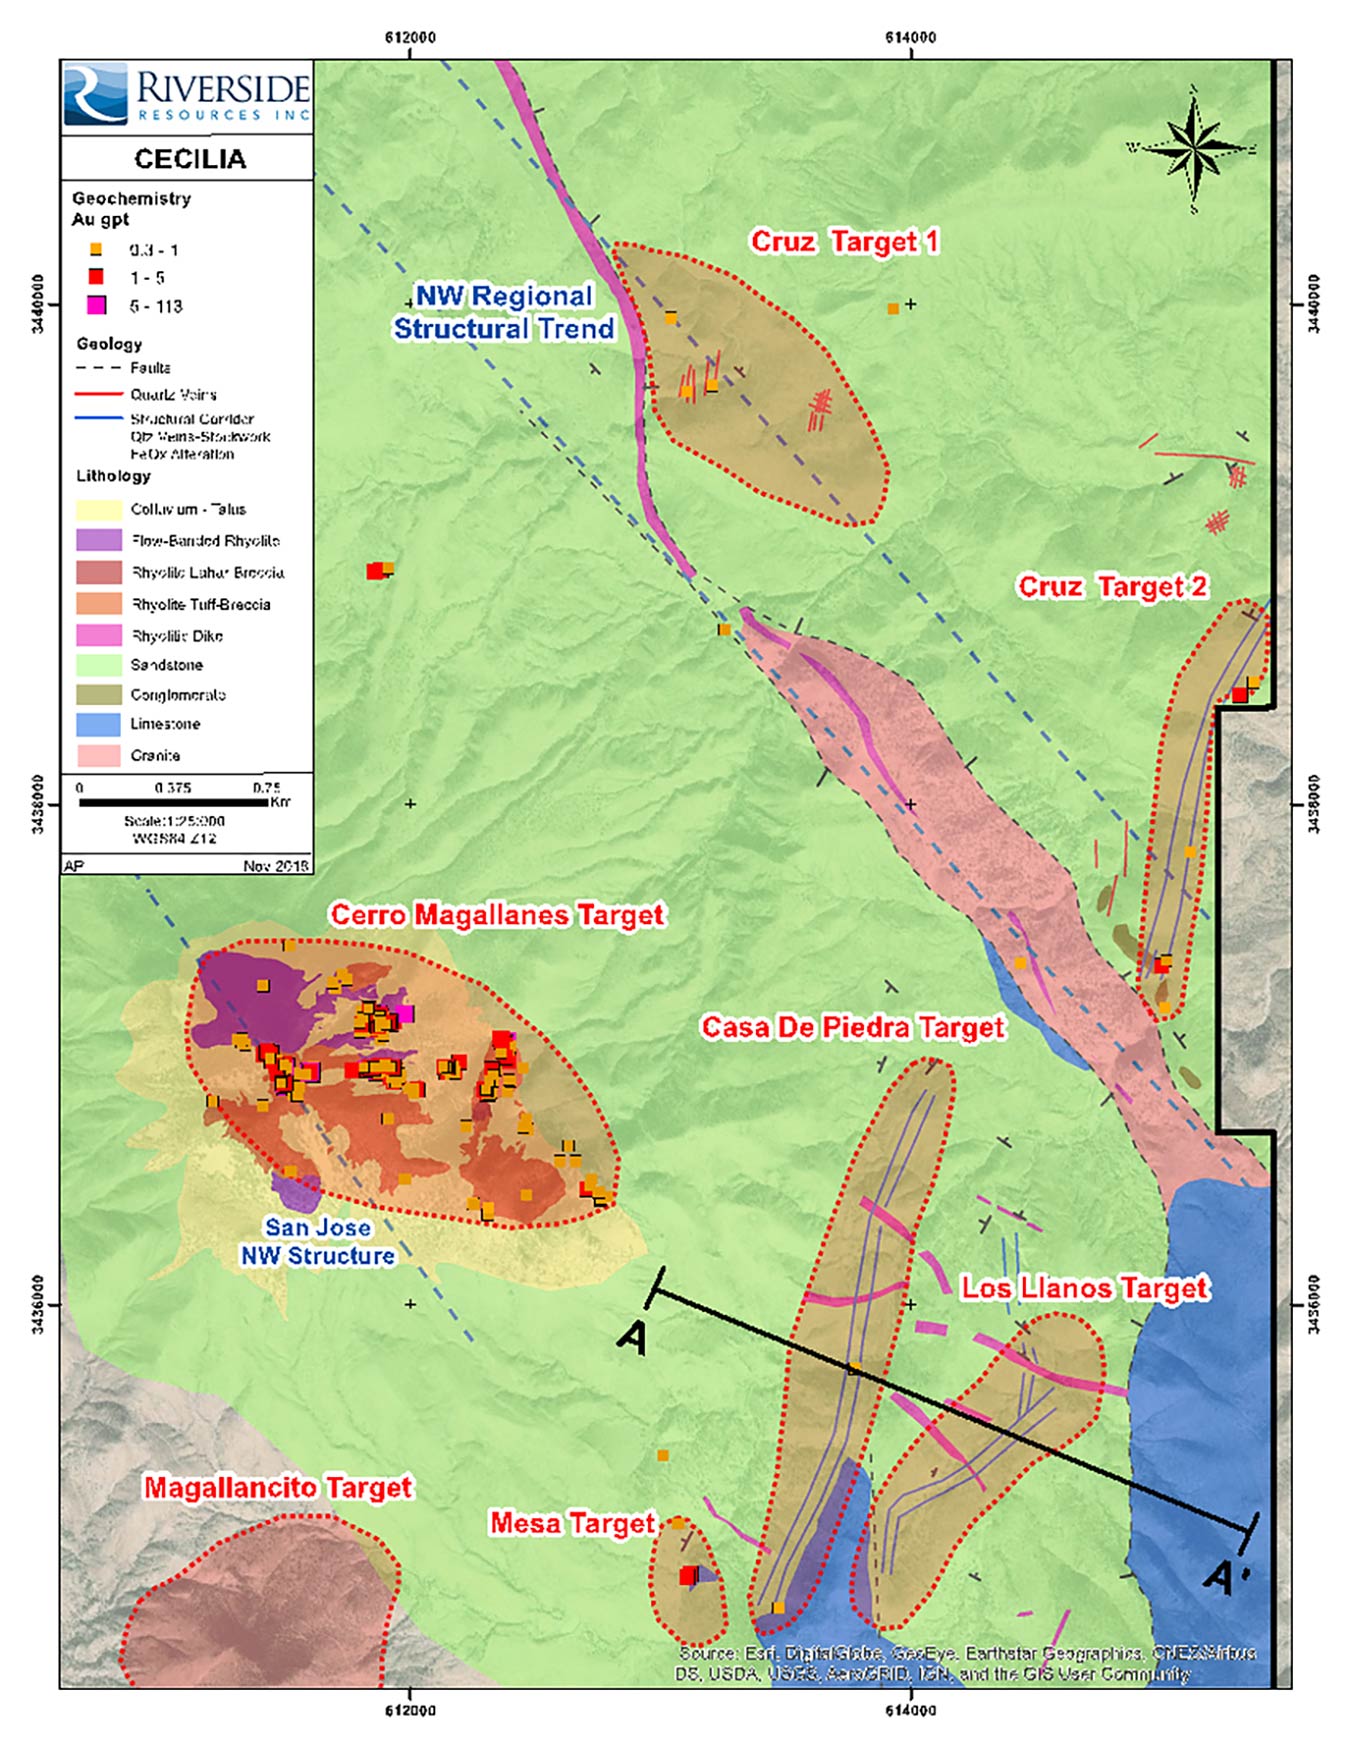 This image shows the geological mapping and gold values of the target areas and puts in context the new target areas locations in comparison to Cerro Magallanes.